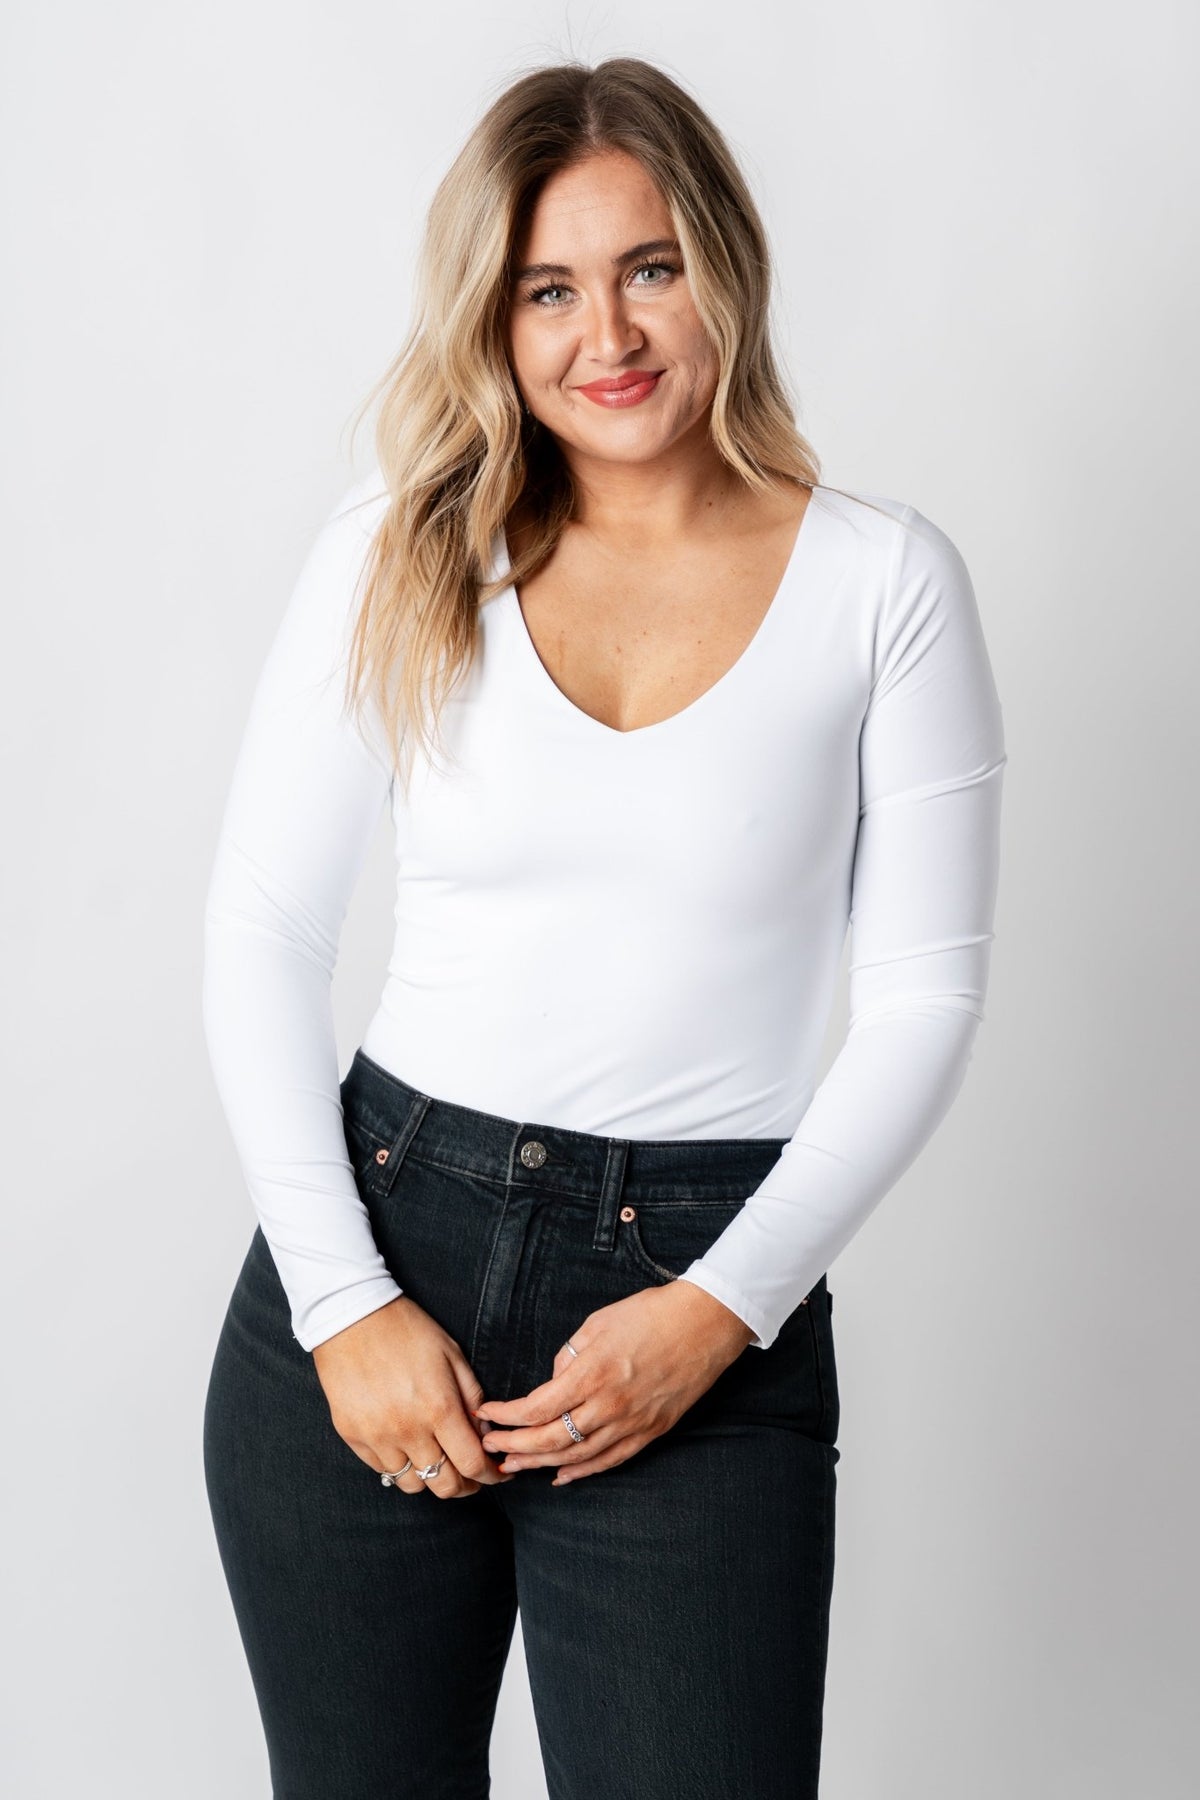 Z Supply So smooth bodysuit white - Z Supply bodysuit - Z Supply Tops, Dresses, Tanks, Tees, Cardigans, Joggers and Loungewear at Lush Fashion Lounge